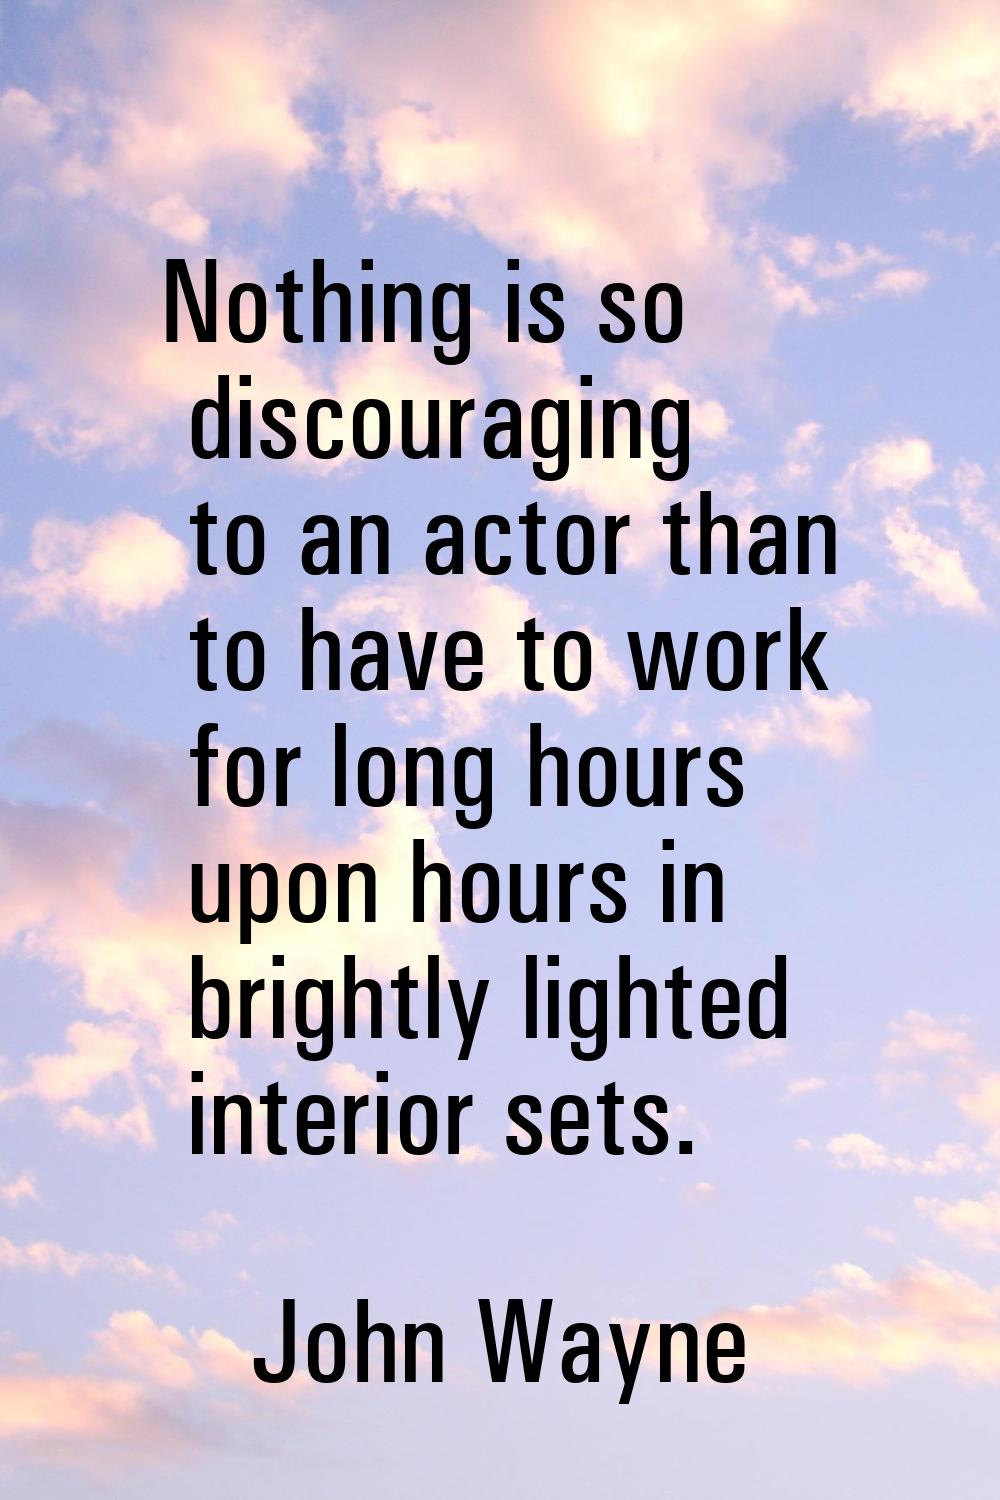 Nothing is so discouraging to an actor than to have to work for long hours upon hours in brightly l